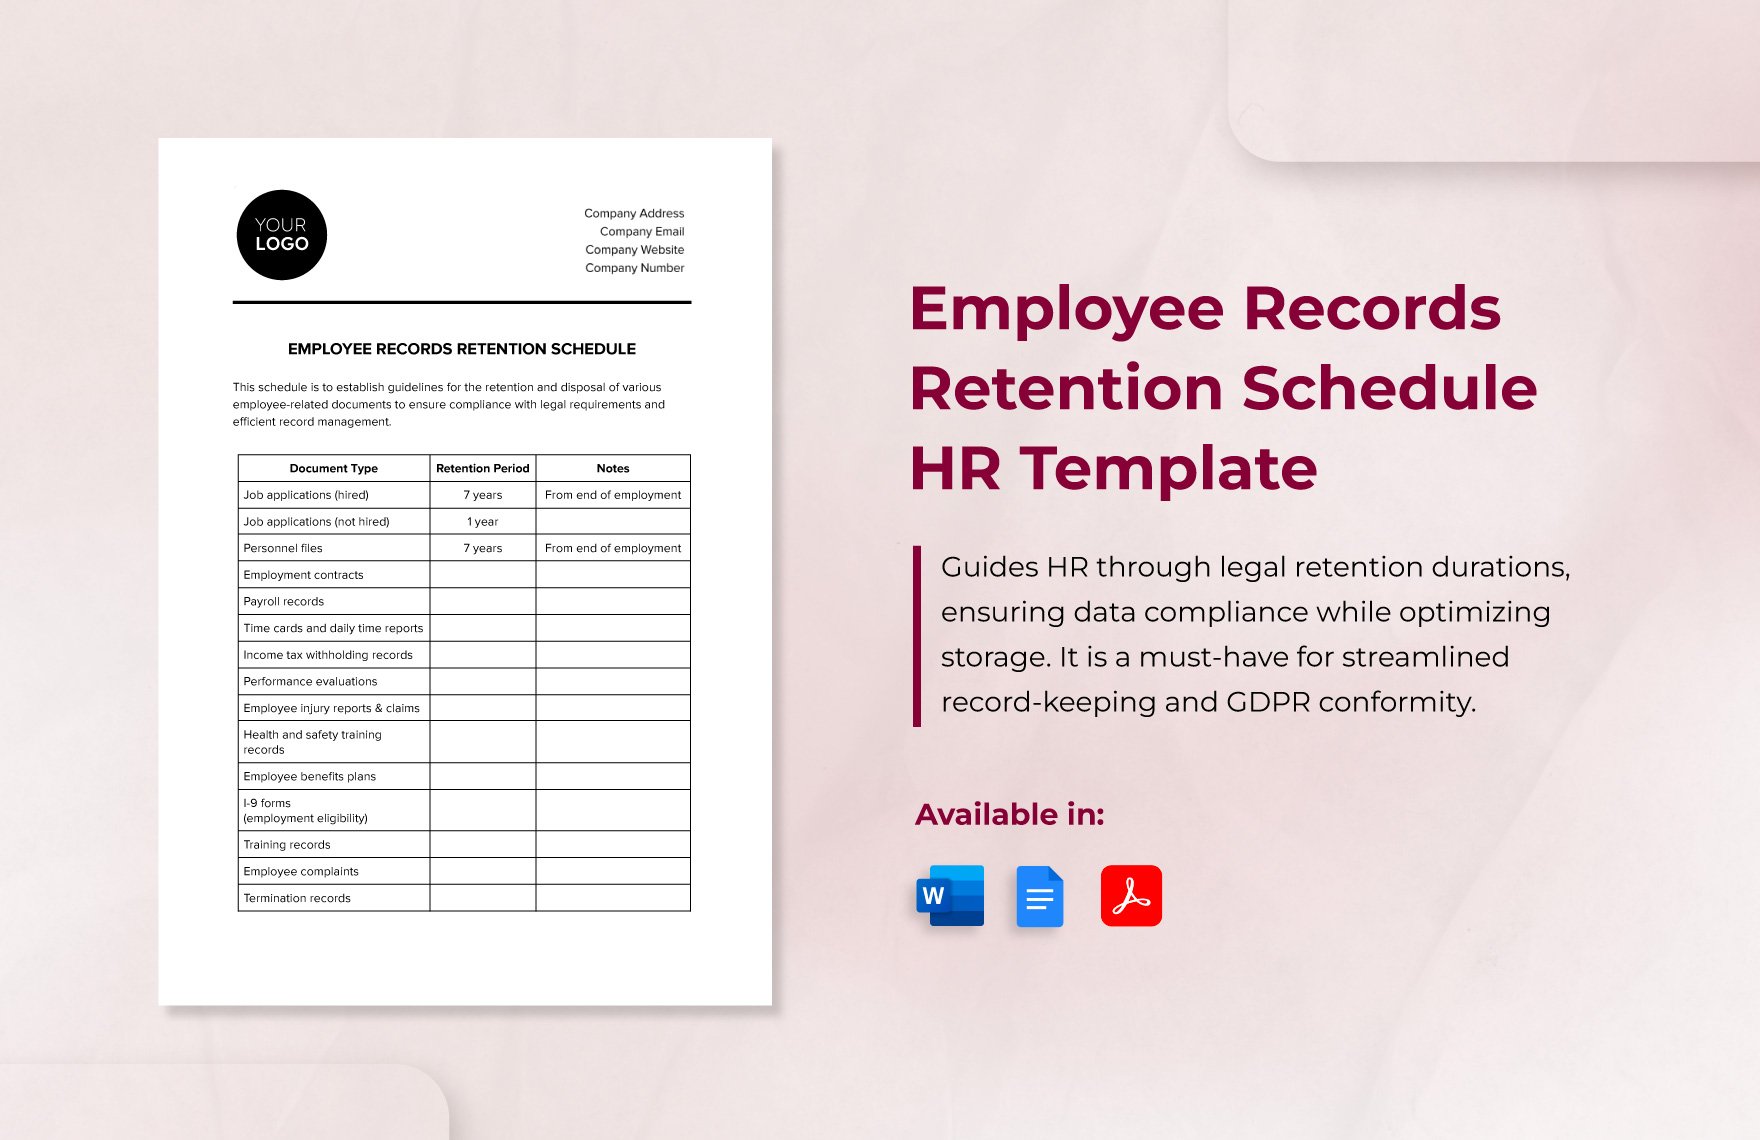 Employee Records Retention Schedule HR Template in Word, Google Docs, PDF